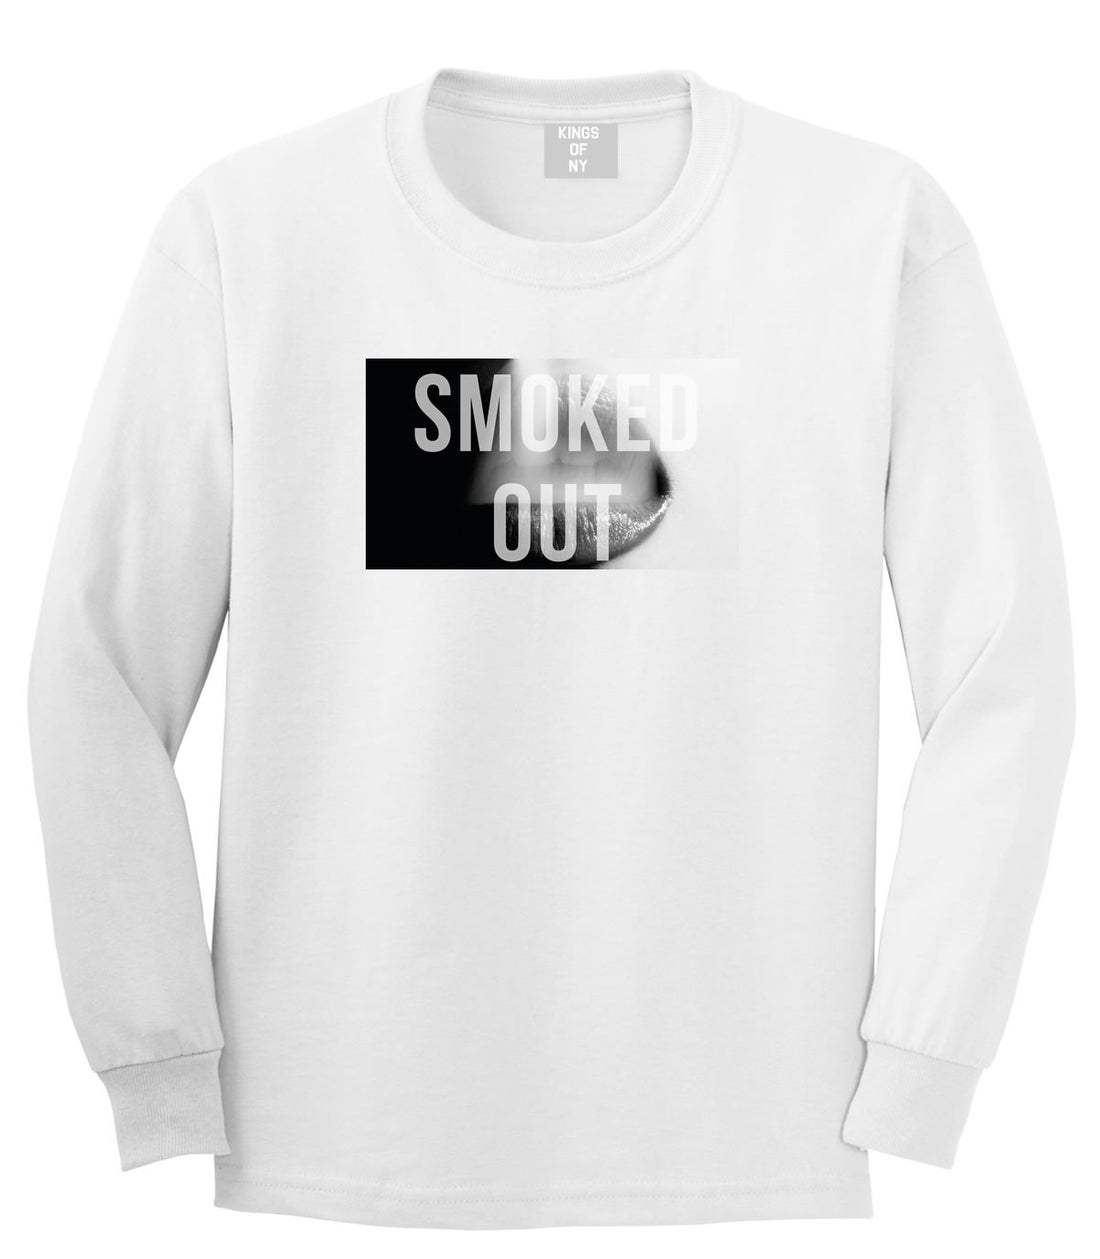 Smoked Out Weed Marijuana Girls Pot New York Long Sleeve Boys Kids T-Shirt in White by Kings Of NY